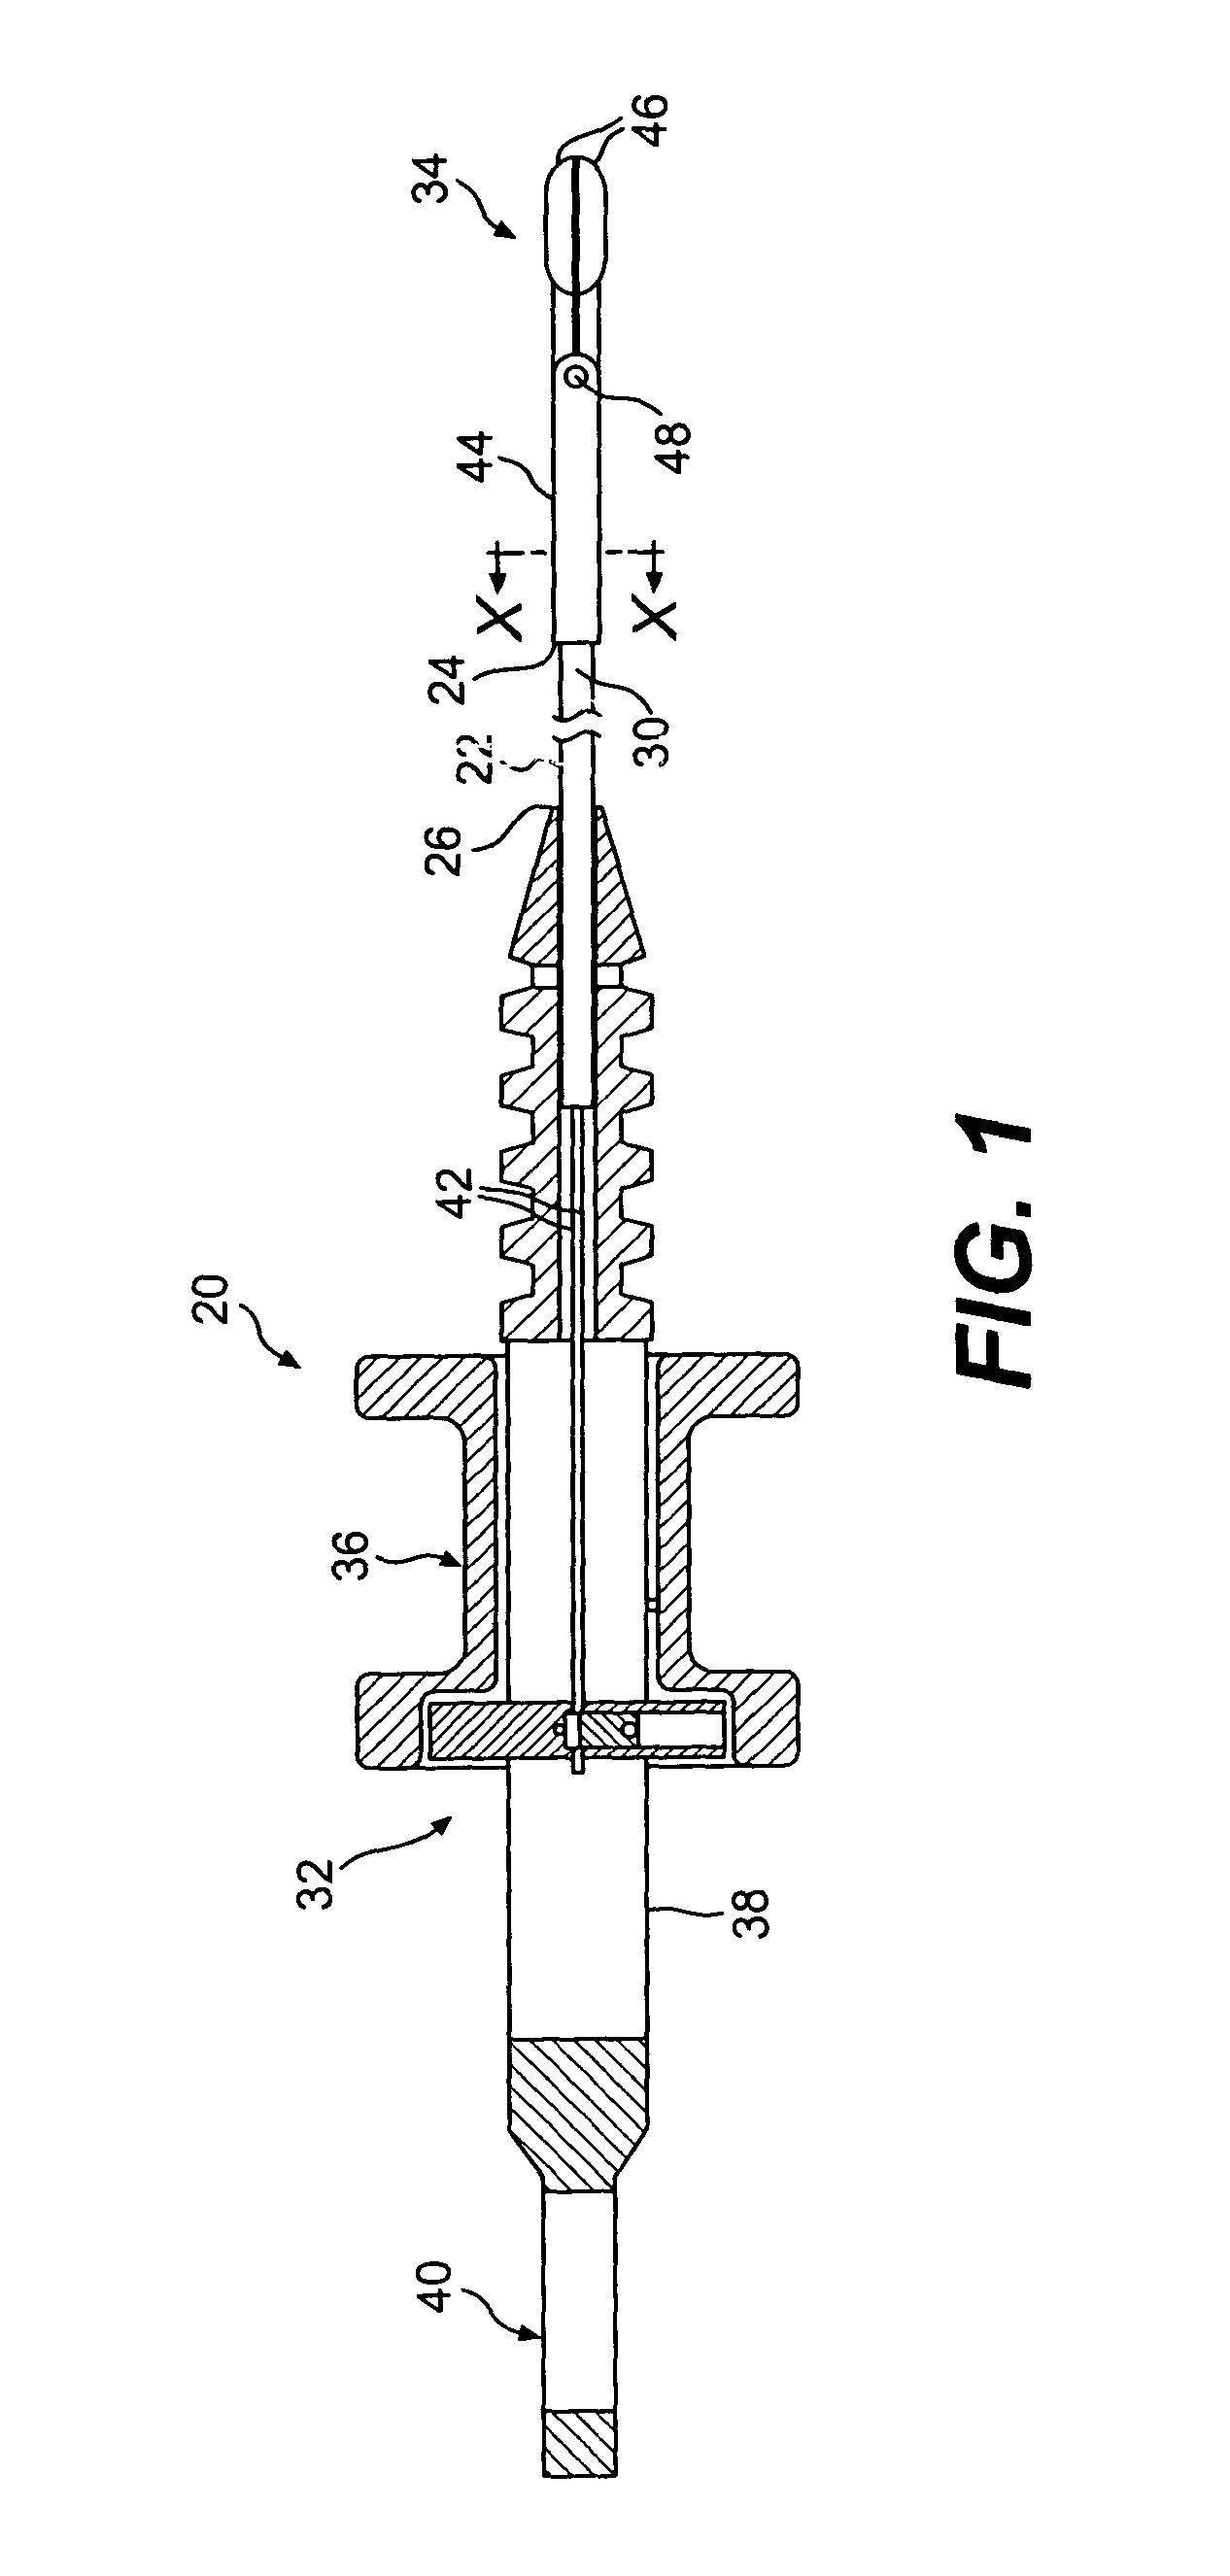 Endoscopic medical instrument and related methods of use